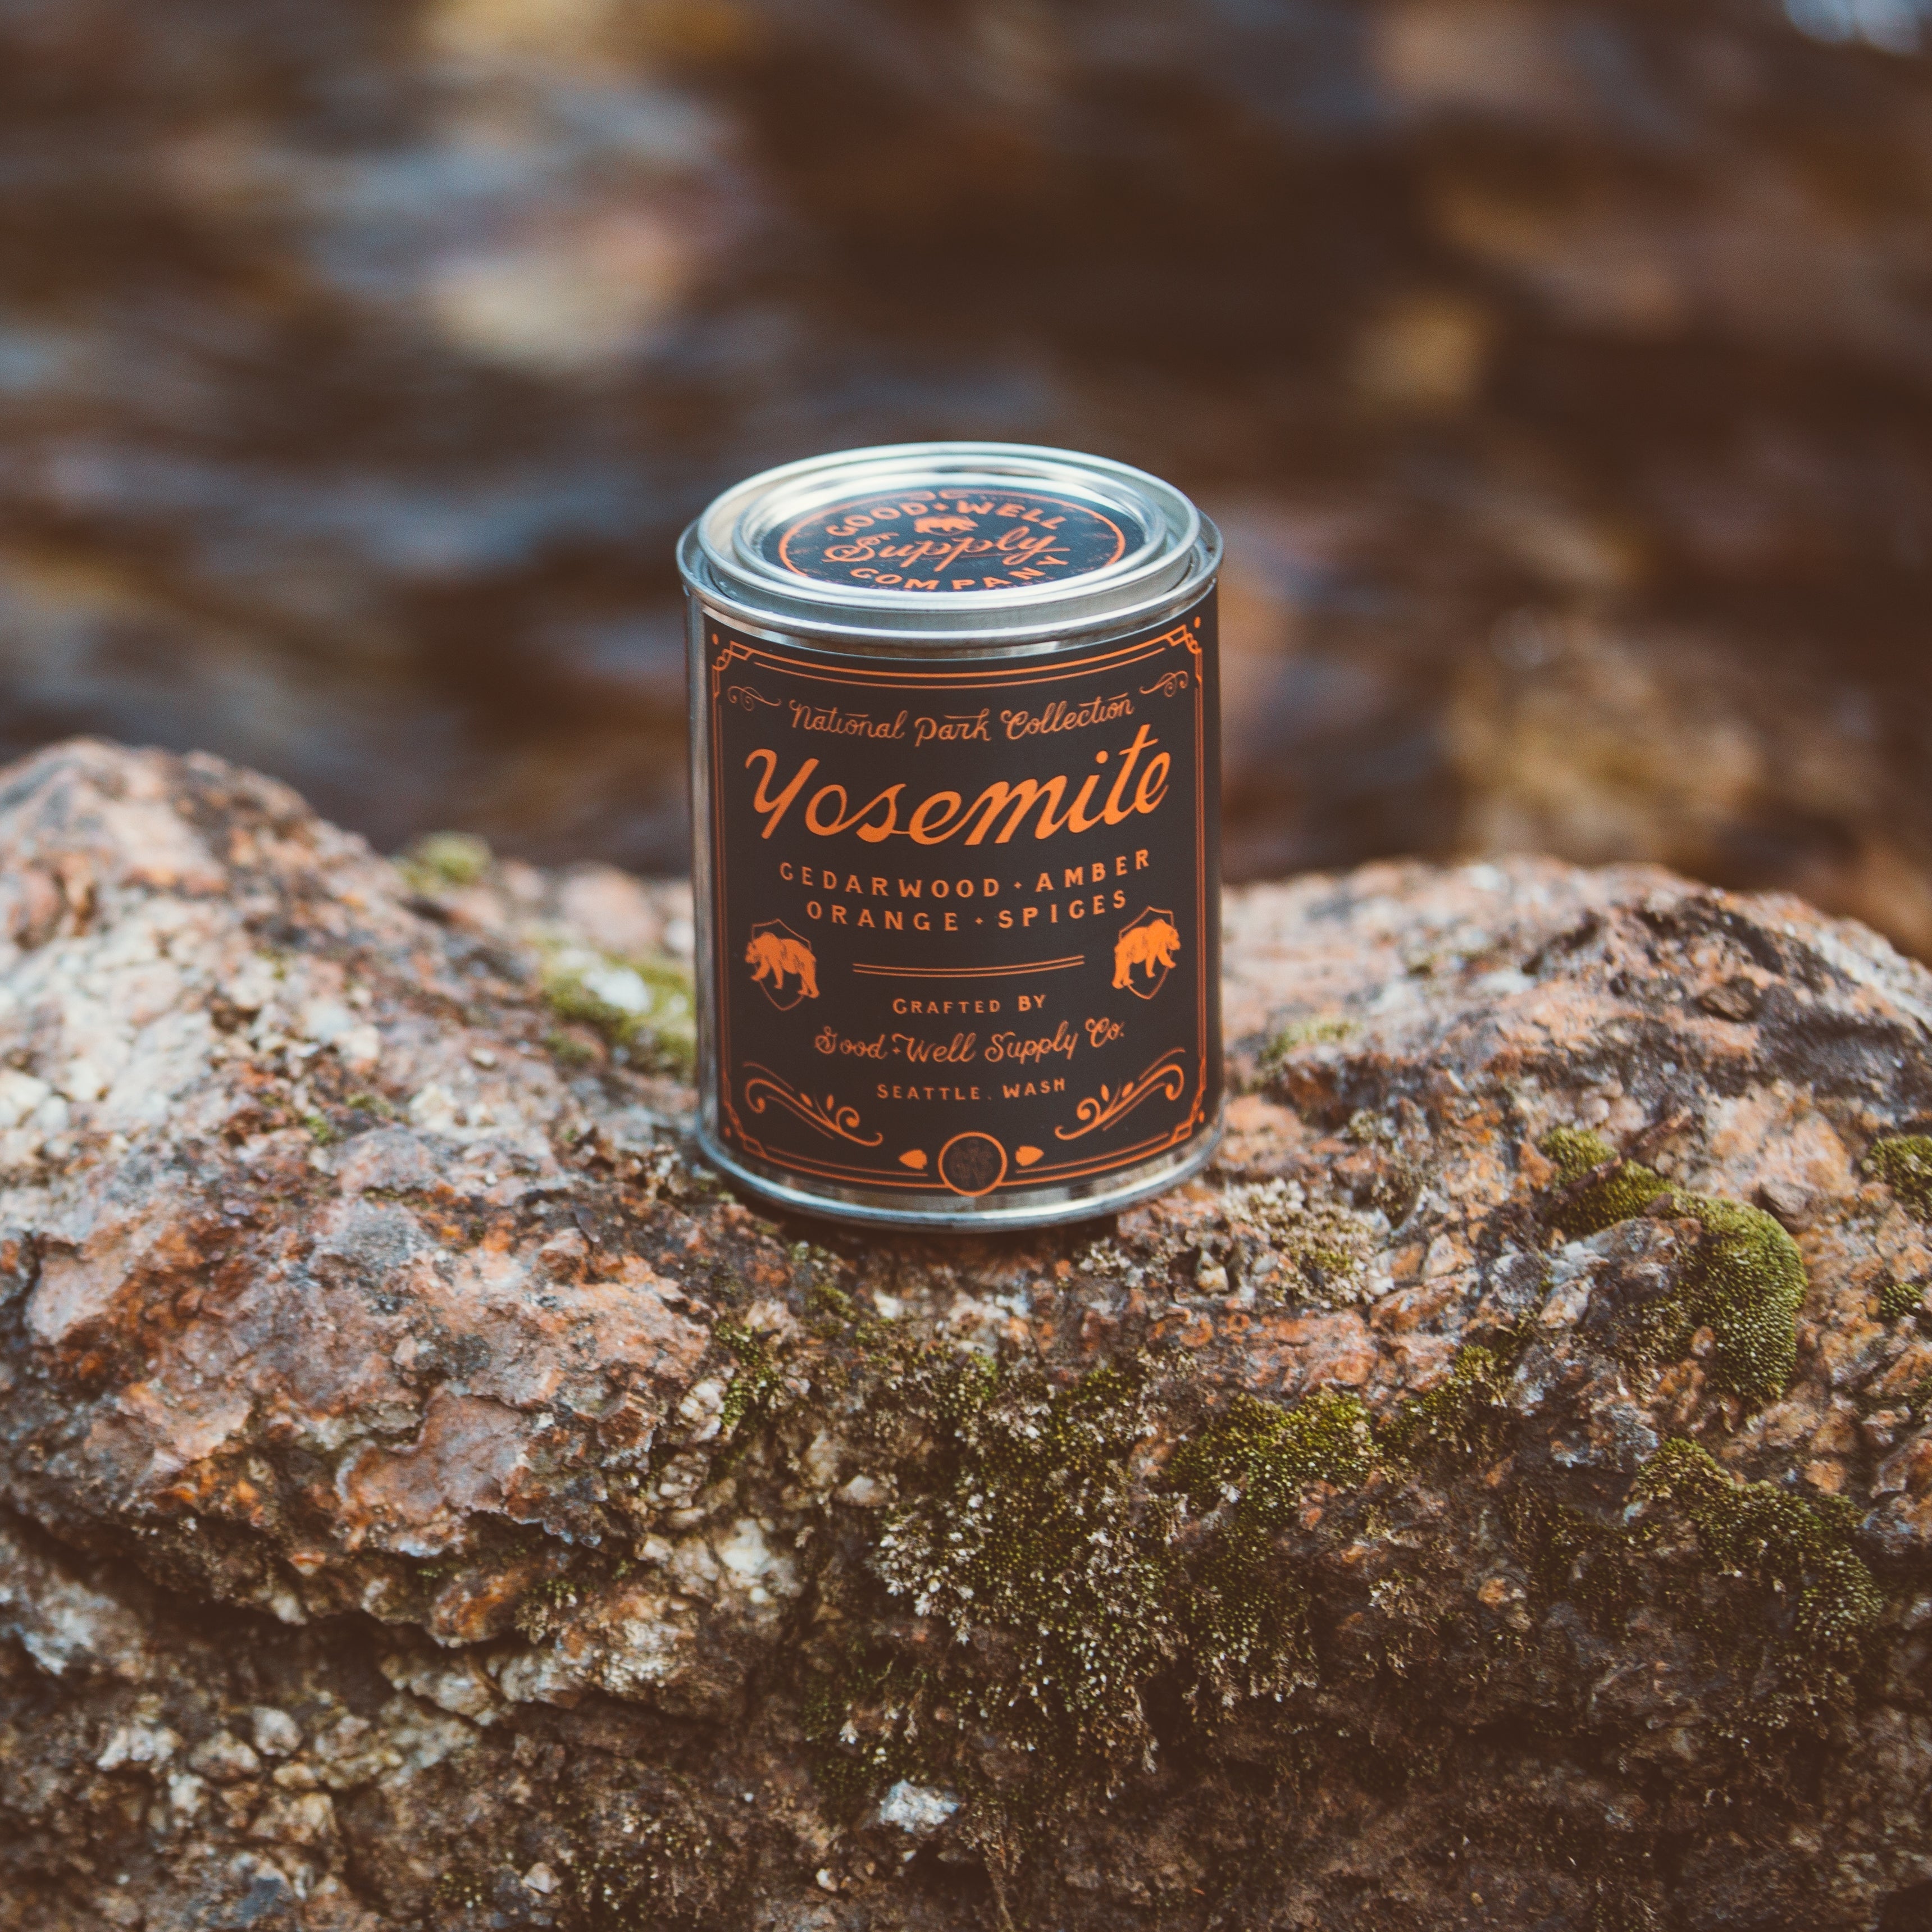 Yosemite Candle - Cedarwood, Amber, Orange & Spice 1/2 Pint With Wooden Wick, Candles, Good & Well Supply Co., Defiance Outdoor Gear Co.